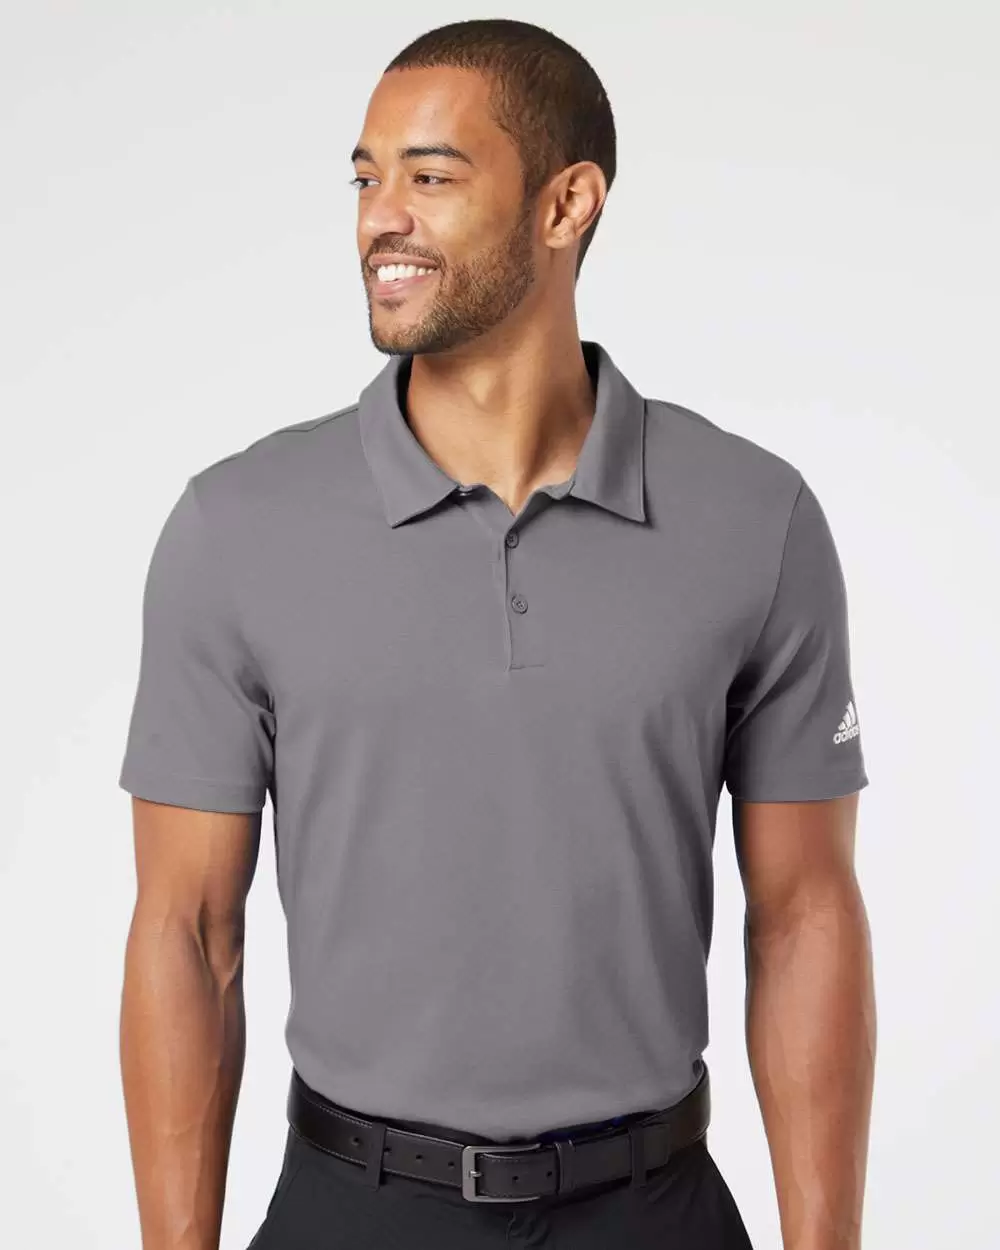 Adidas Clothing A322 Cotton Sport Shirt - From $30.85